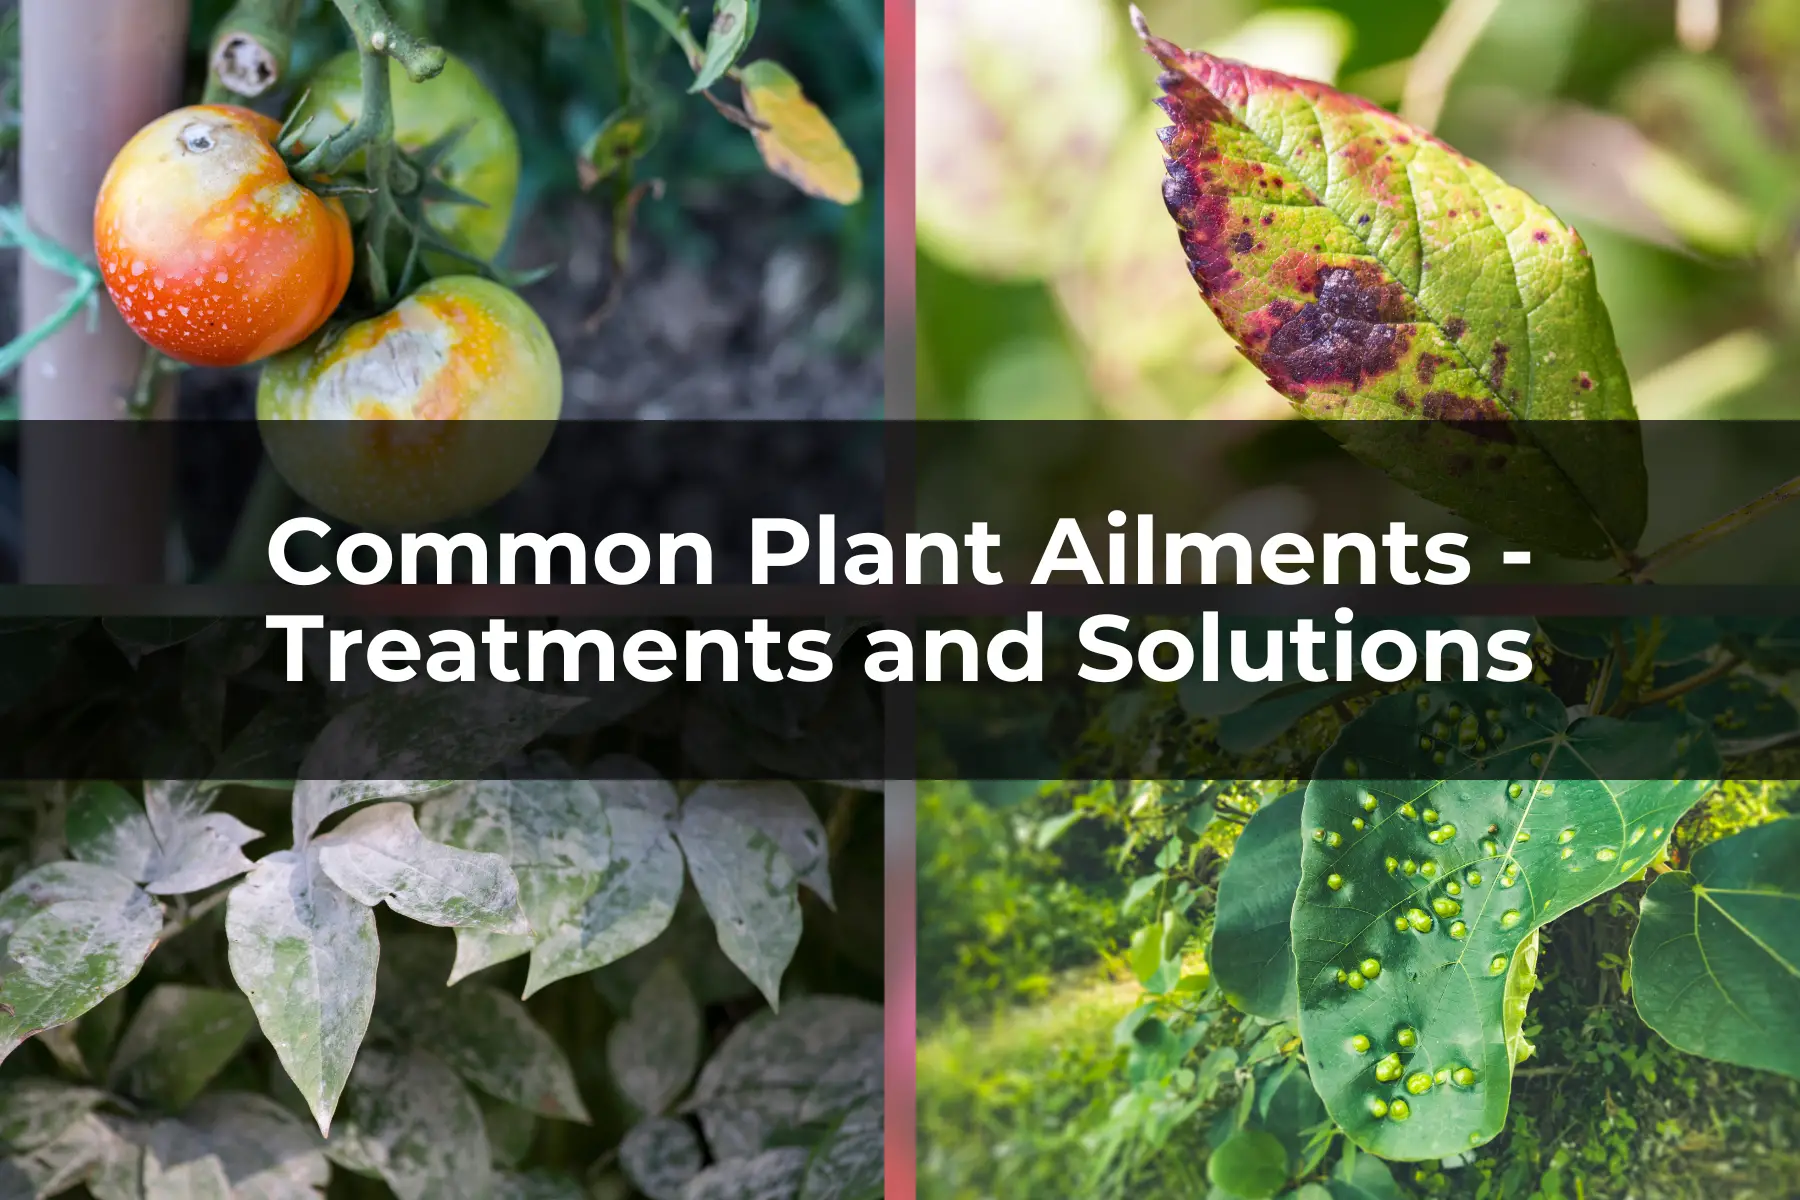 Common Plant Ailments - Treatments and Solutions